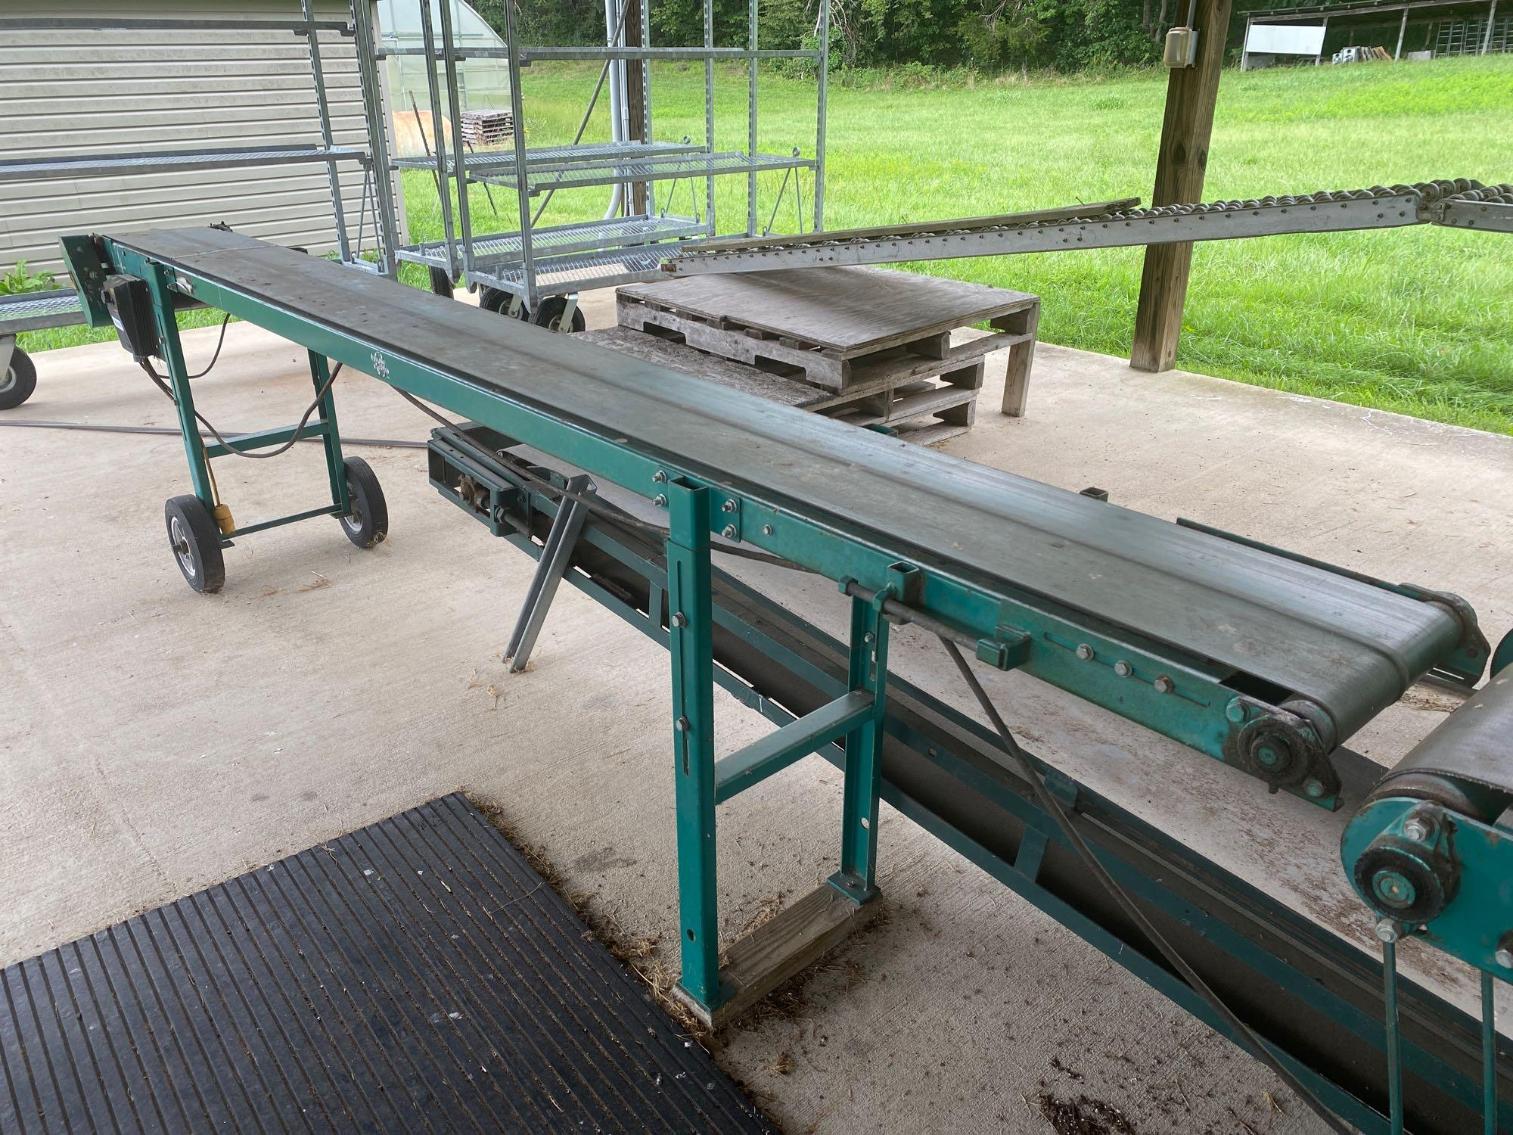 Image for Bouldin and Lawson 10' Portable Conveyor w/ 10